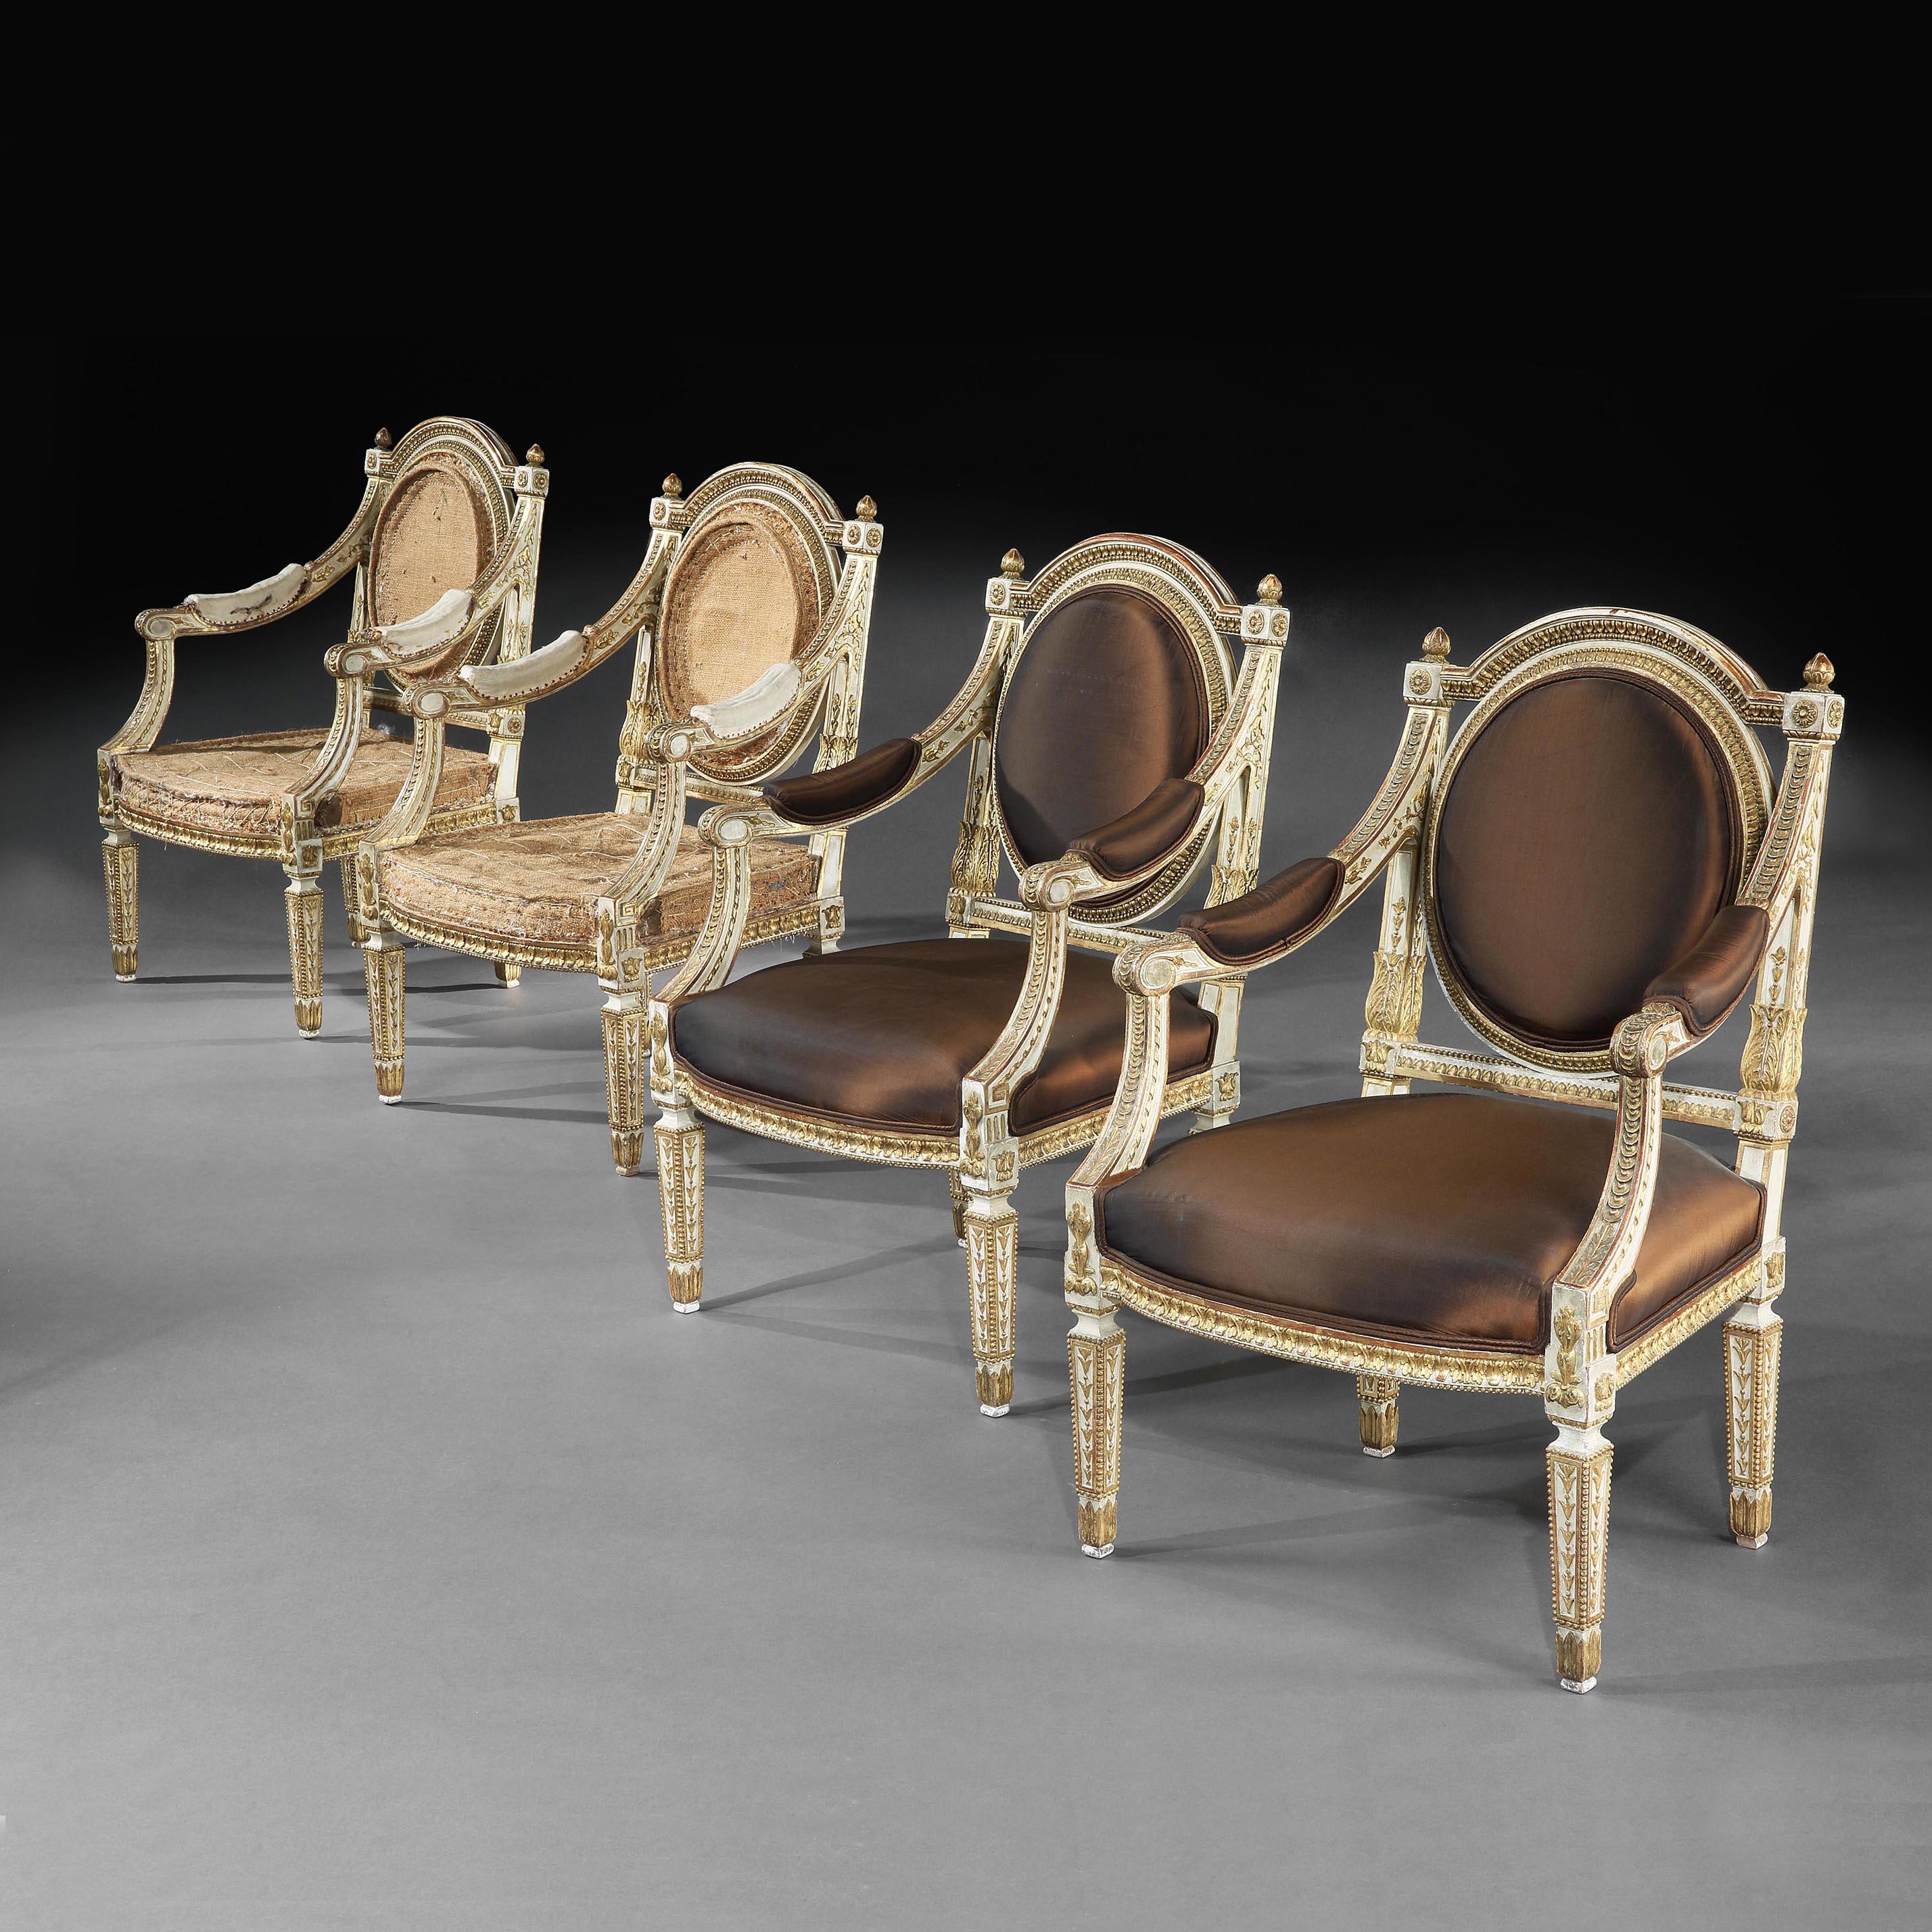 Extremely fine and decorative pair of 19th century Italian painted and parcel gilt armchairs of neoclassical design.

Italian, late 19th century, circa 1880-1900.

Oozing style these are very attractive parcel gilt armchairs, having husk and